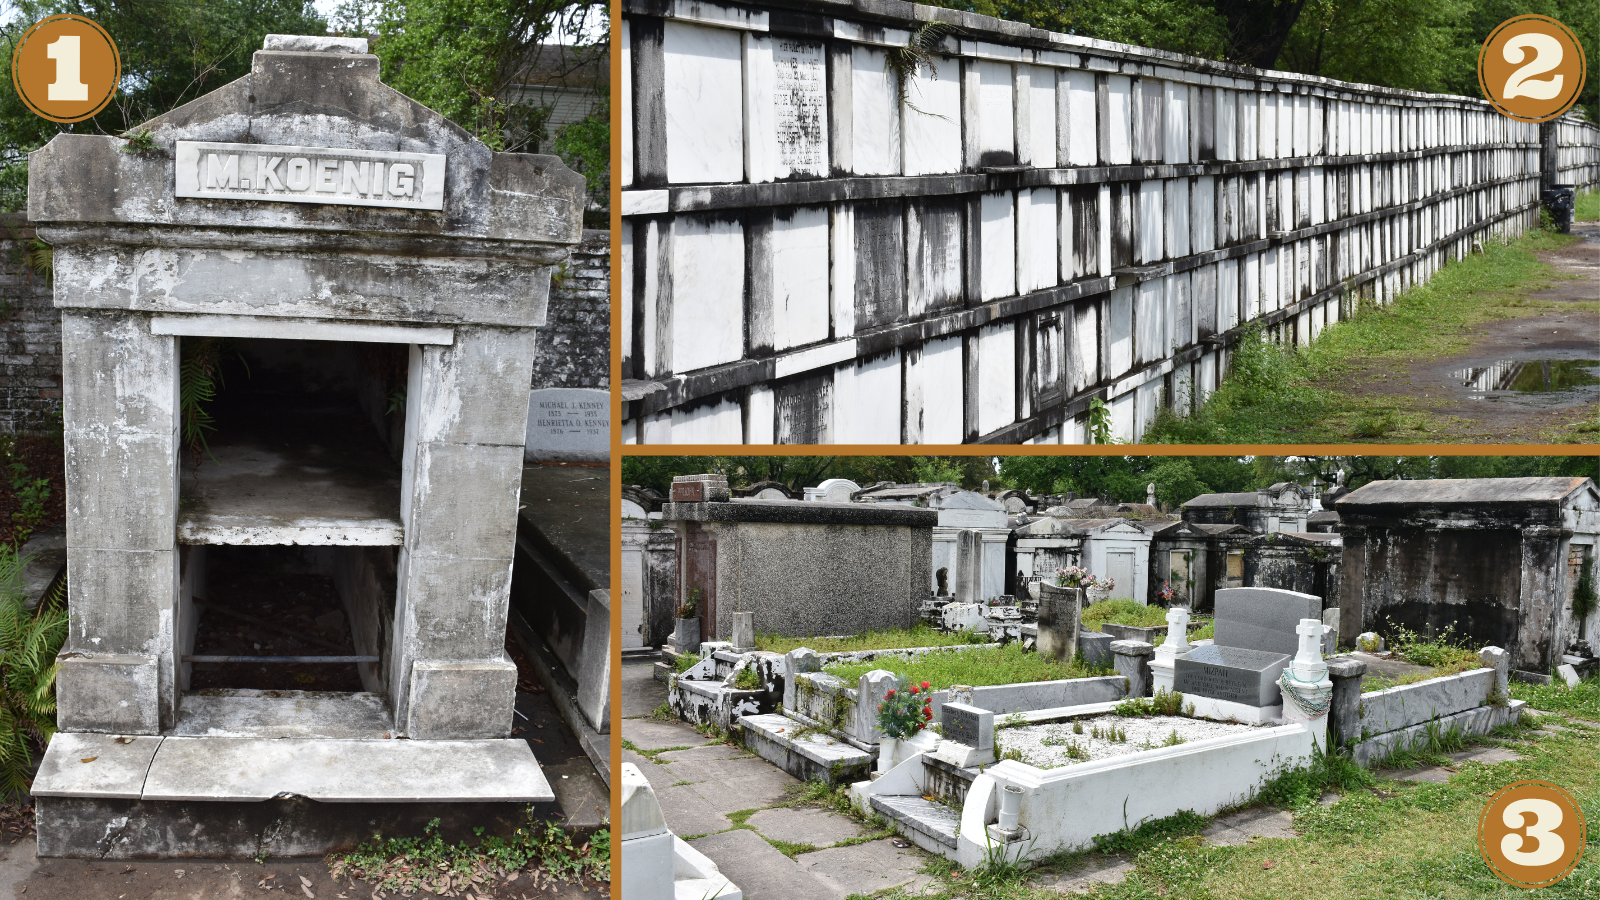 A collage of tombs in Lafayette Cemetery. By the number one is an open tomb, number 2 is the tombs in walls, and by number three is raised dirt burial spaces.